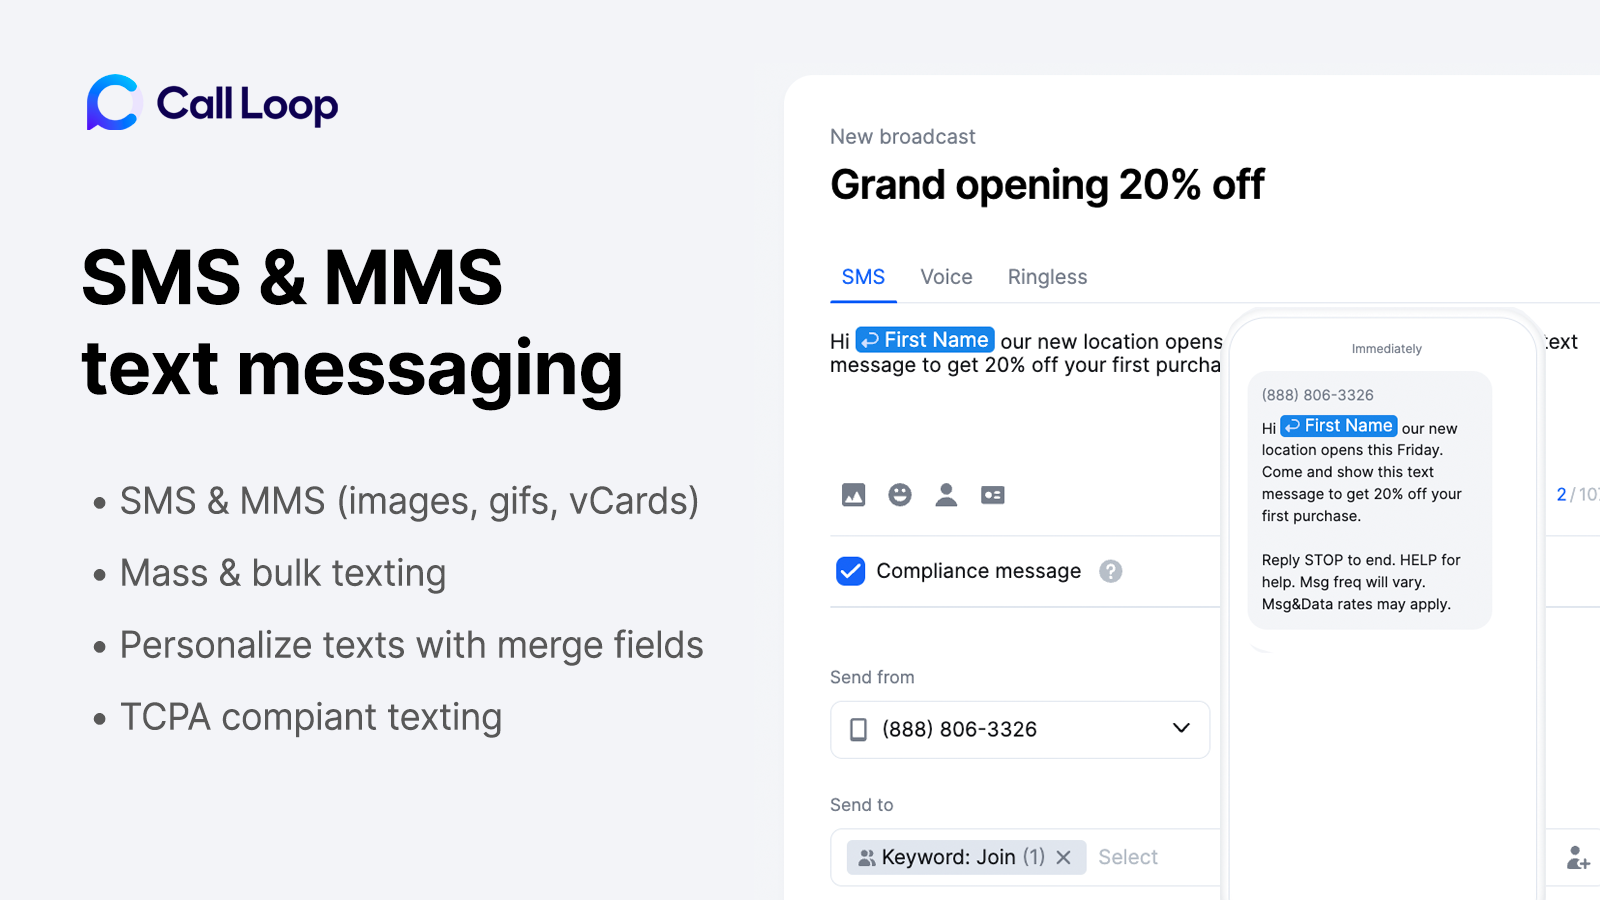 Send personalized business texts, SMS marketing campaigns, and more.